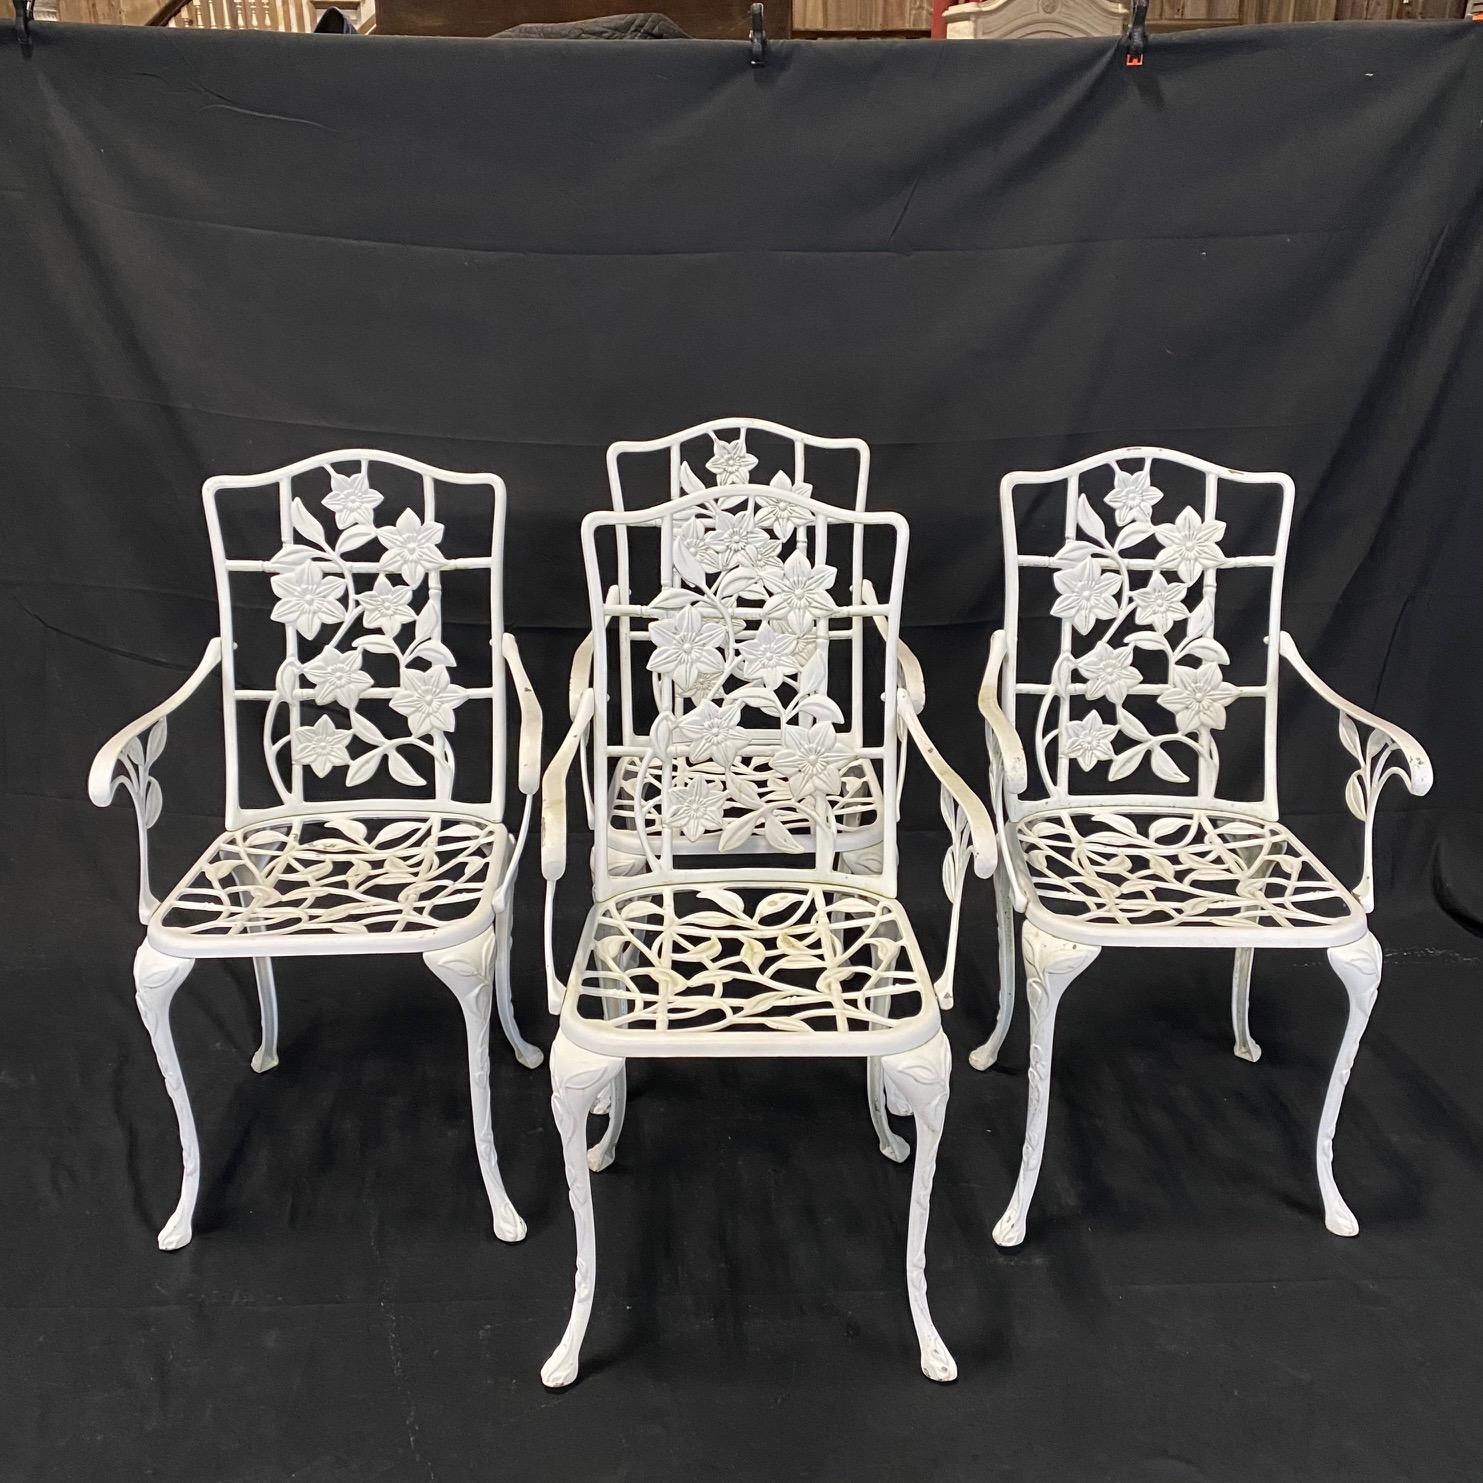 Vintage 5 Piece Set of English Nova Garden Patio Furniture with Vines and Leaves For Sale 2